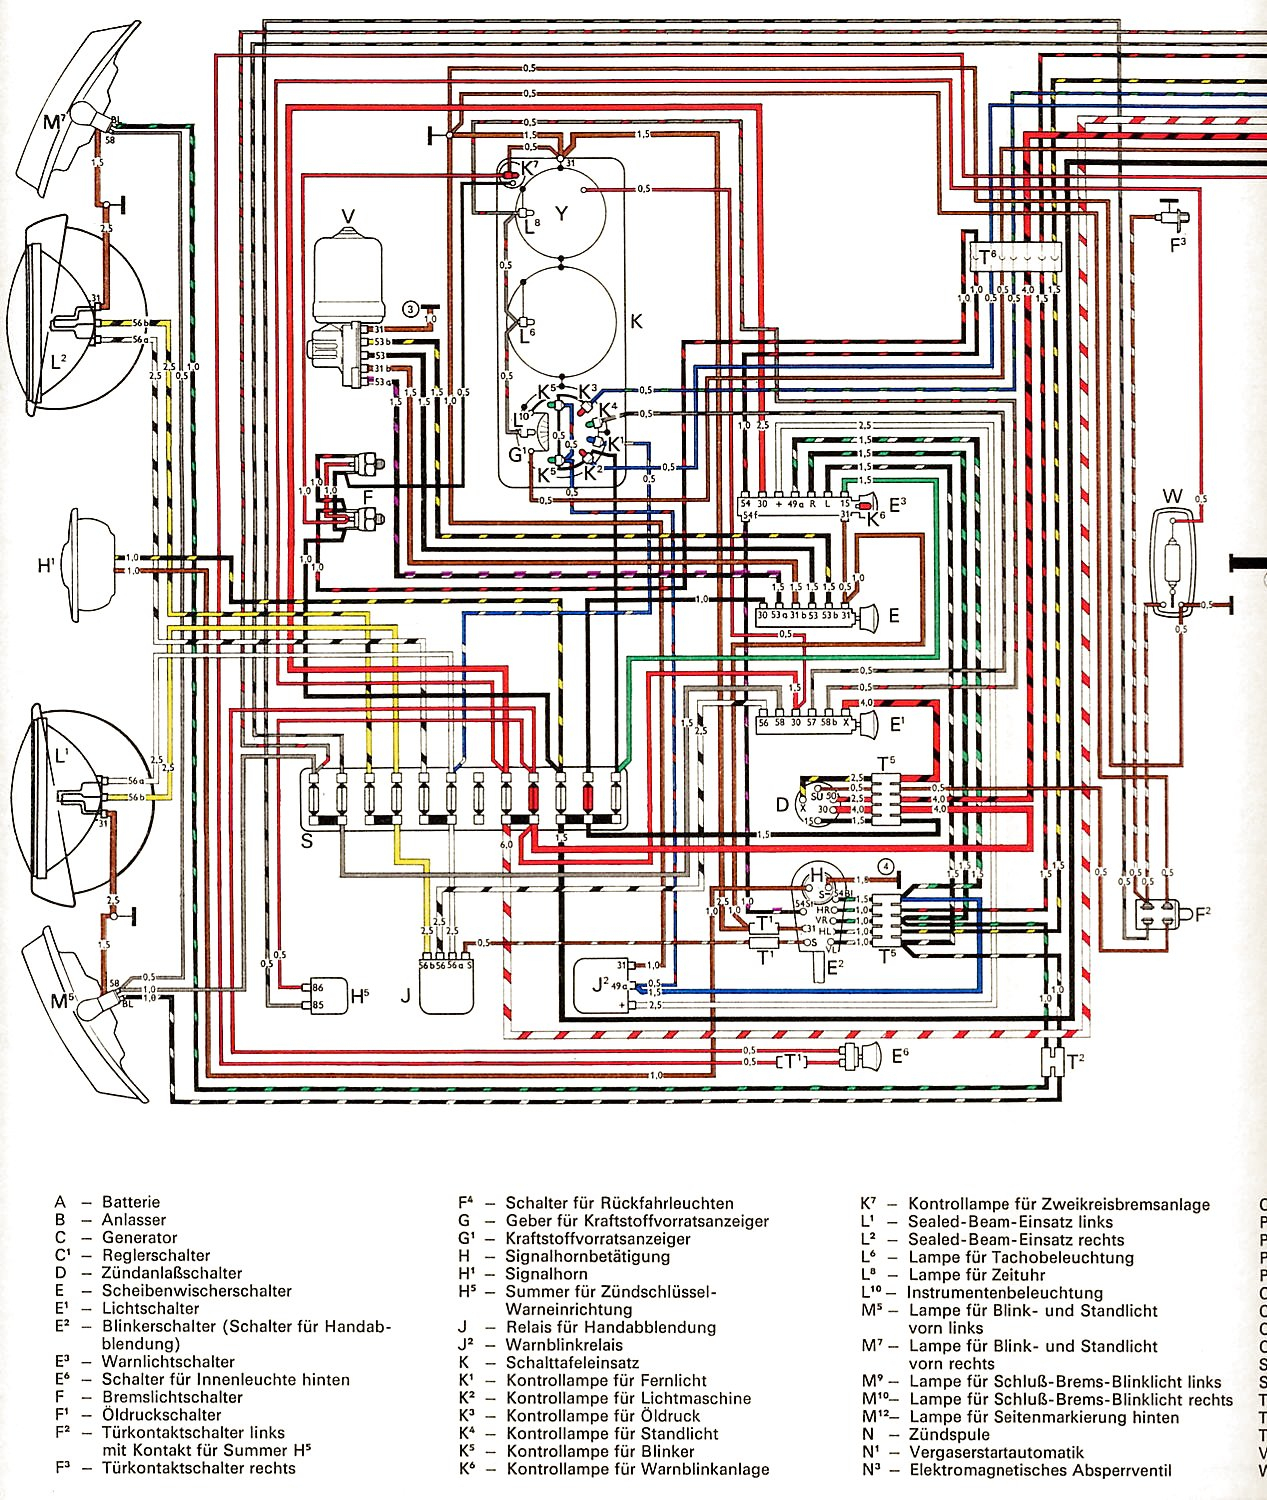 Vintagebus - Vw Bus (And Other) Wiring Diagrams - Vw Wiring Diagram